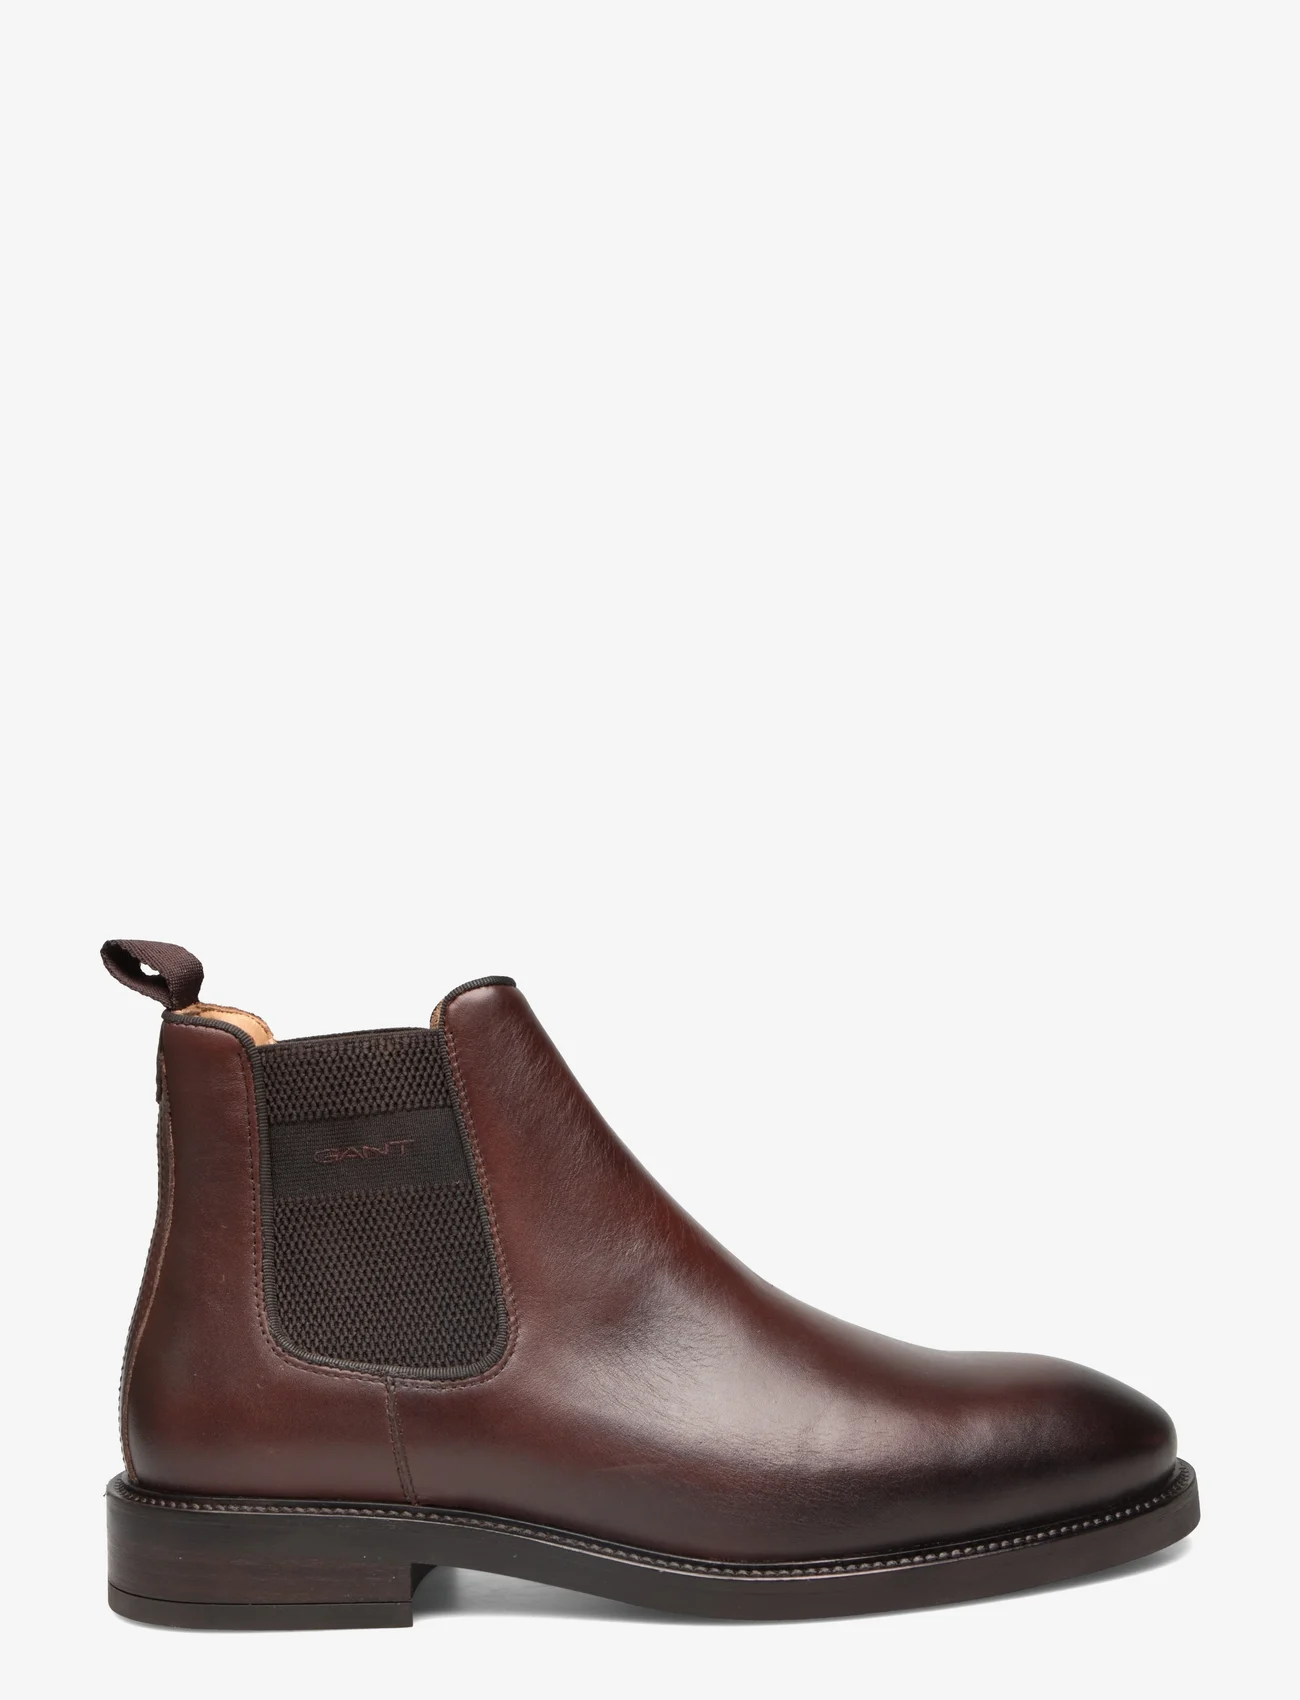 GANT - Flairville Chelsea Boot - birthday gifts - cognac - 1